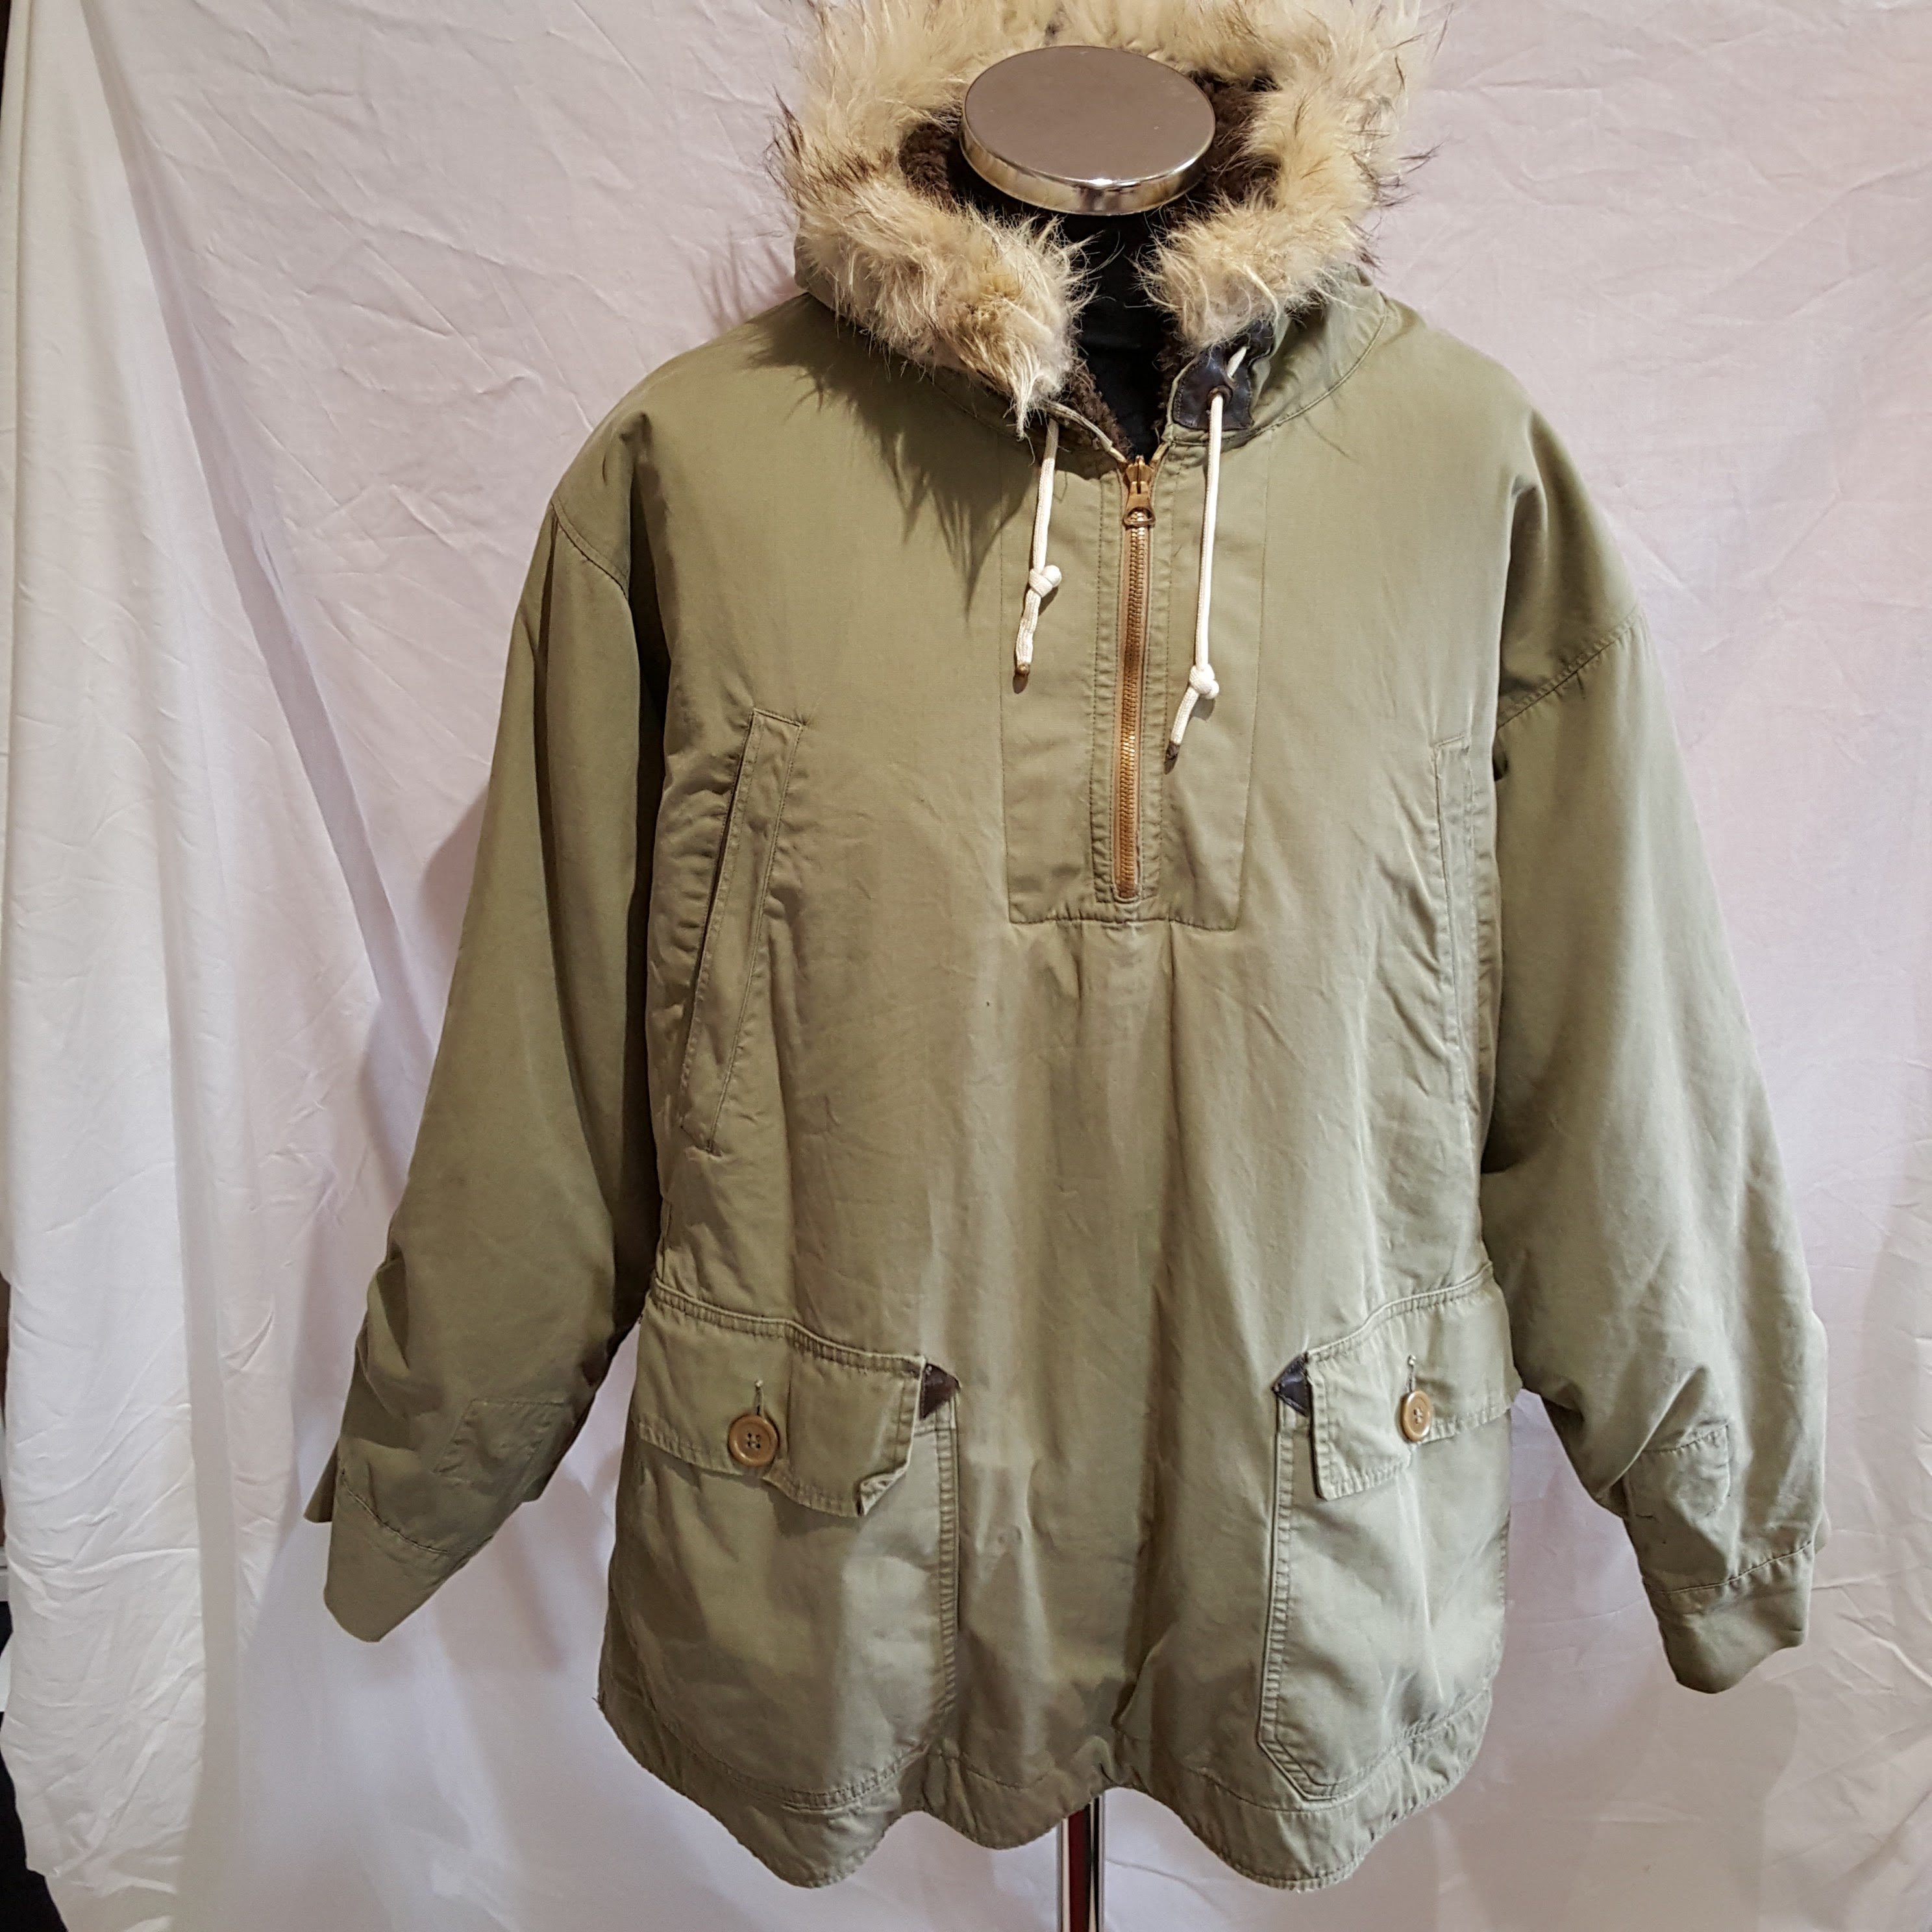 Good B-11 and B-9 Parka repros? | Vintage Leather Jackets Forum